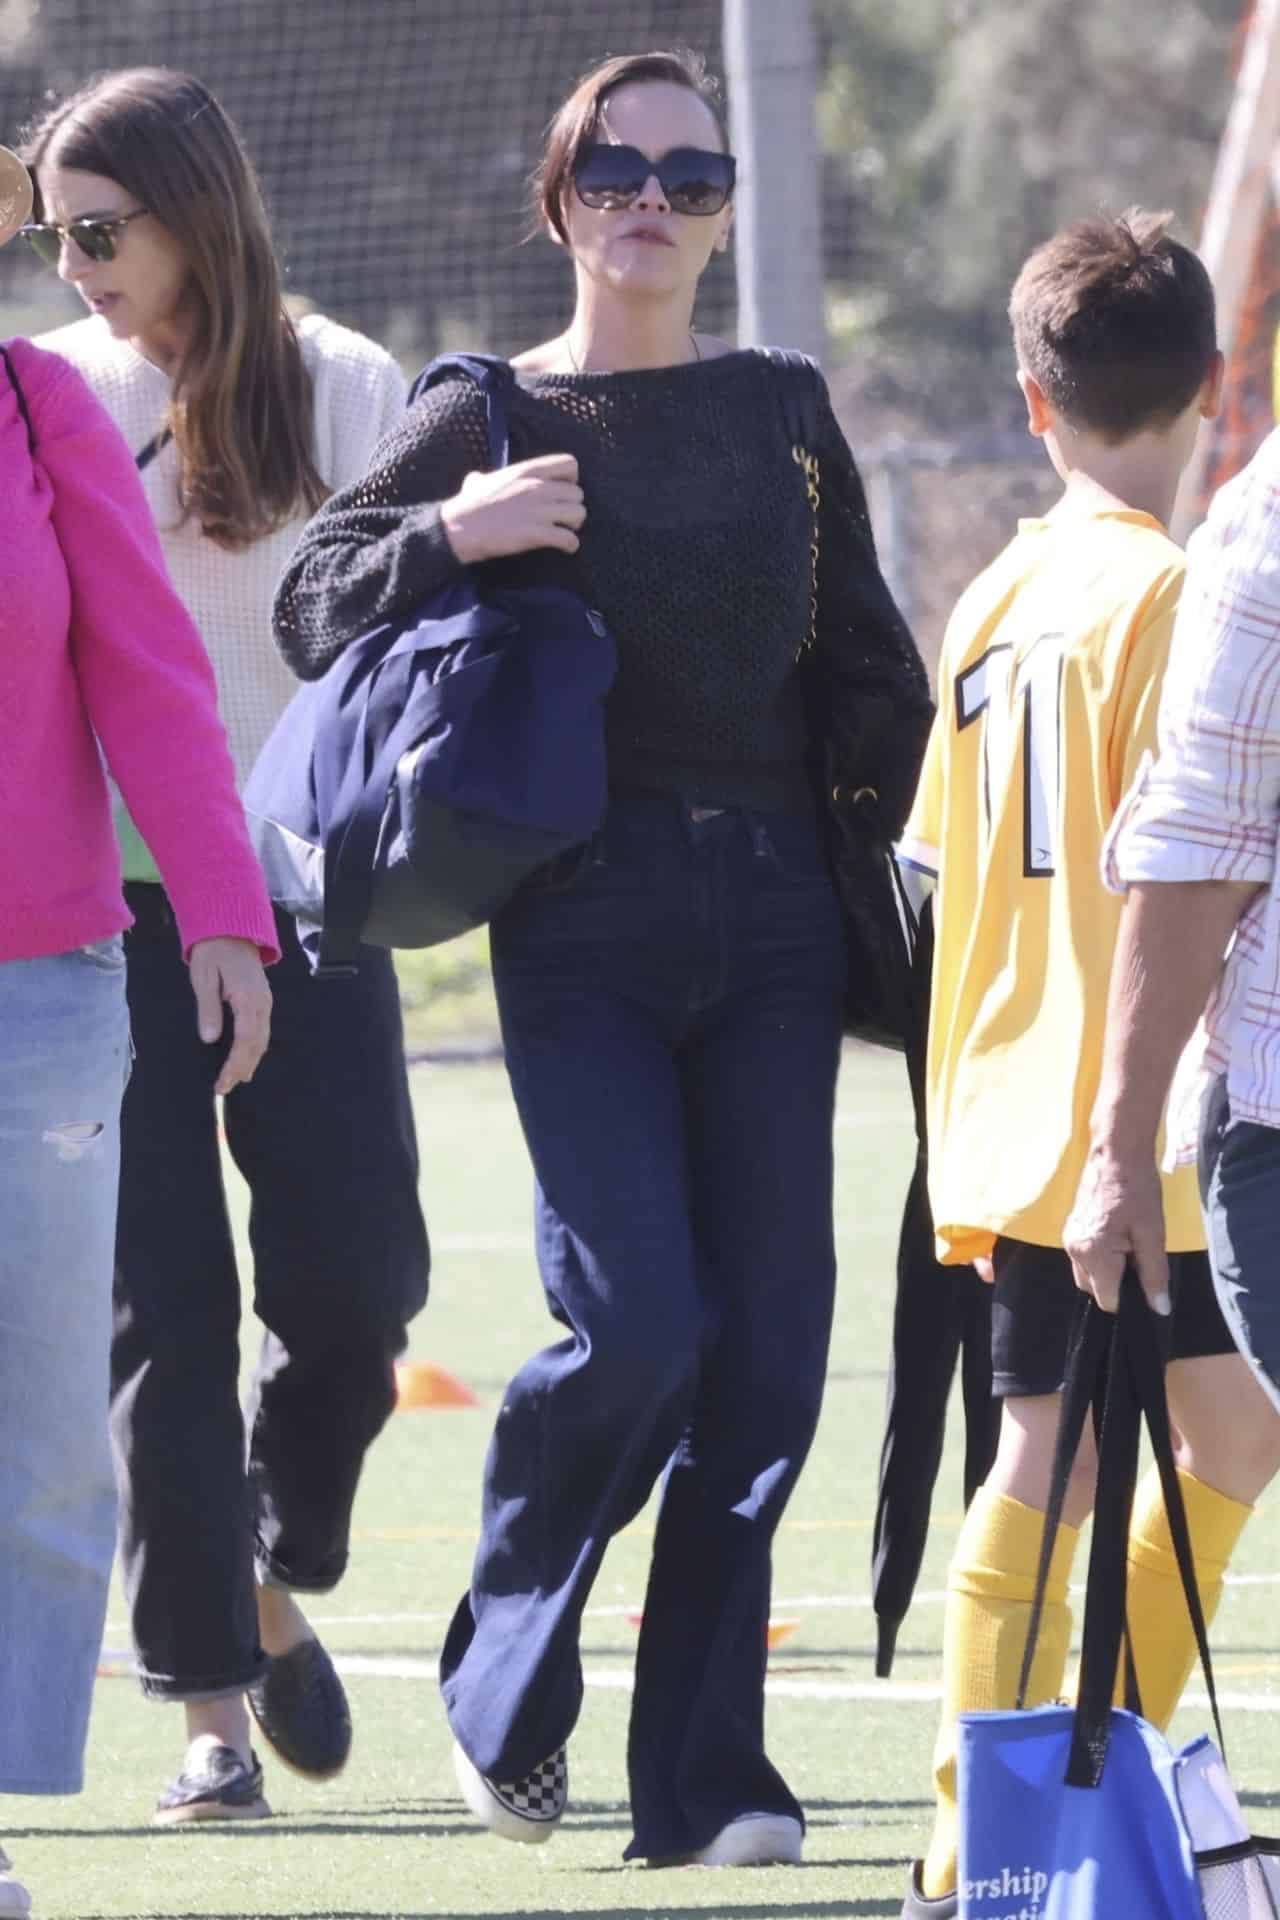 Christina Ricci Captures Retro Vibes with High-Waisted Jeans at Soccer Game